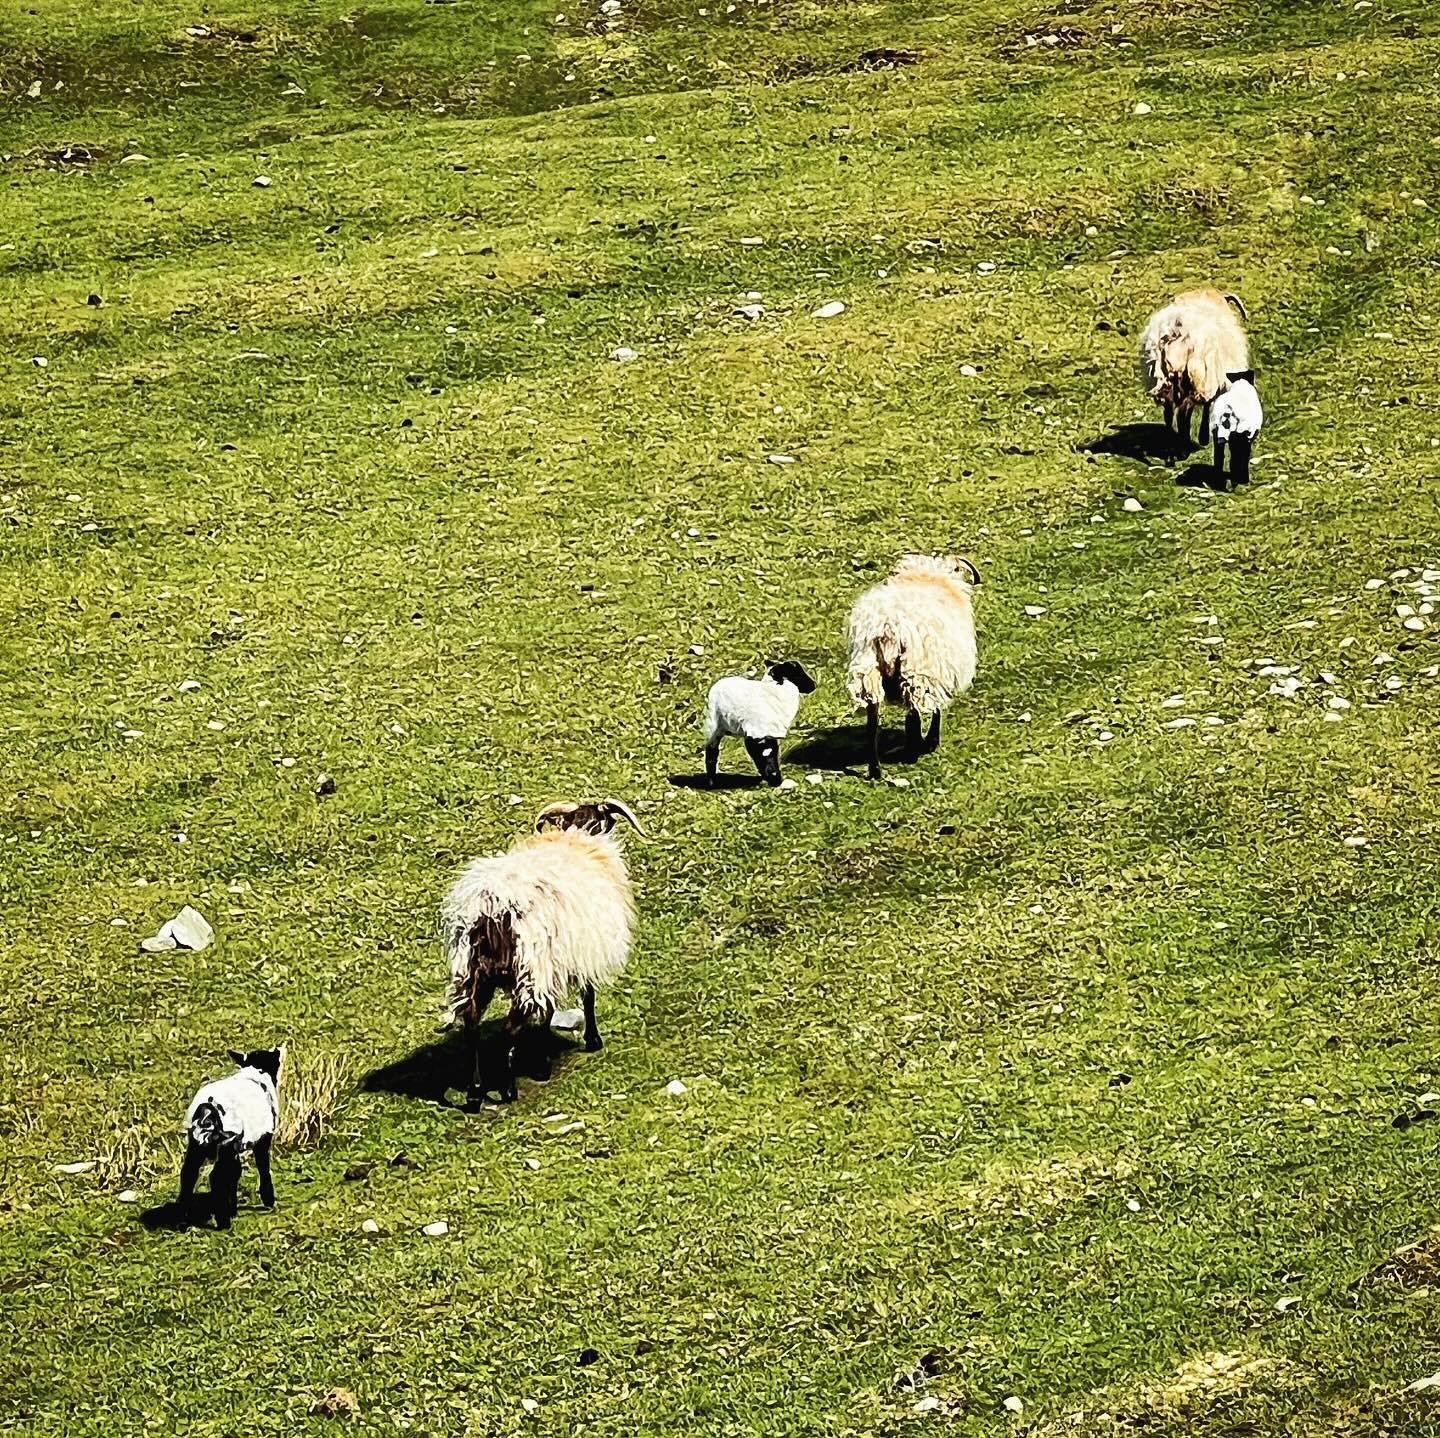 The first half of May is a great time to visit Ireland as there are baby lambs everywhere you look! #countingsheep #lambingseason